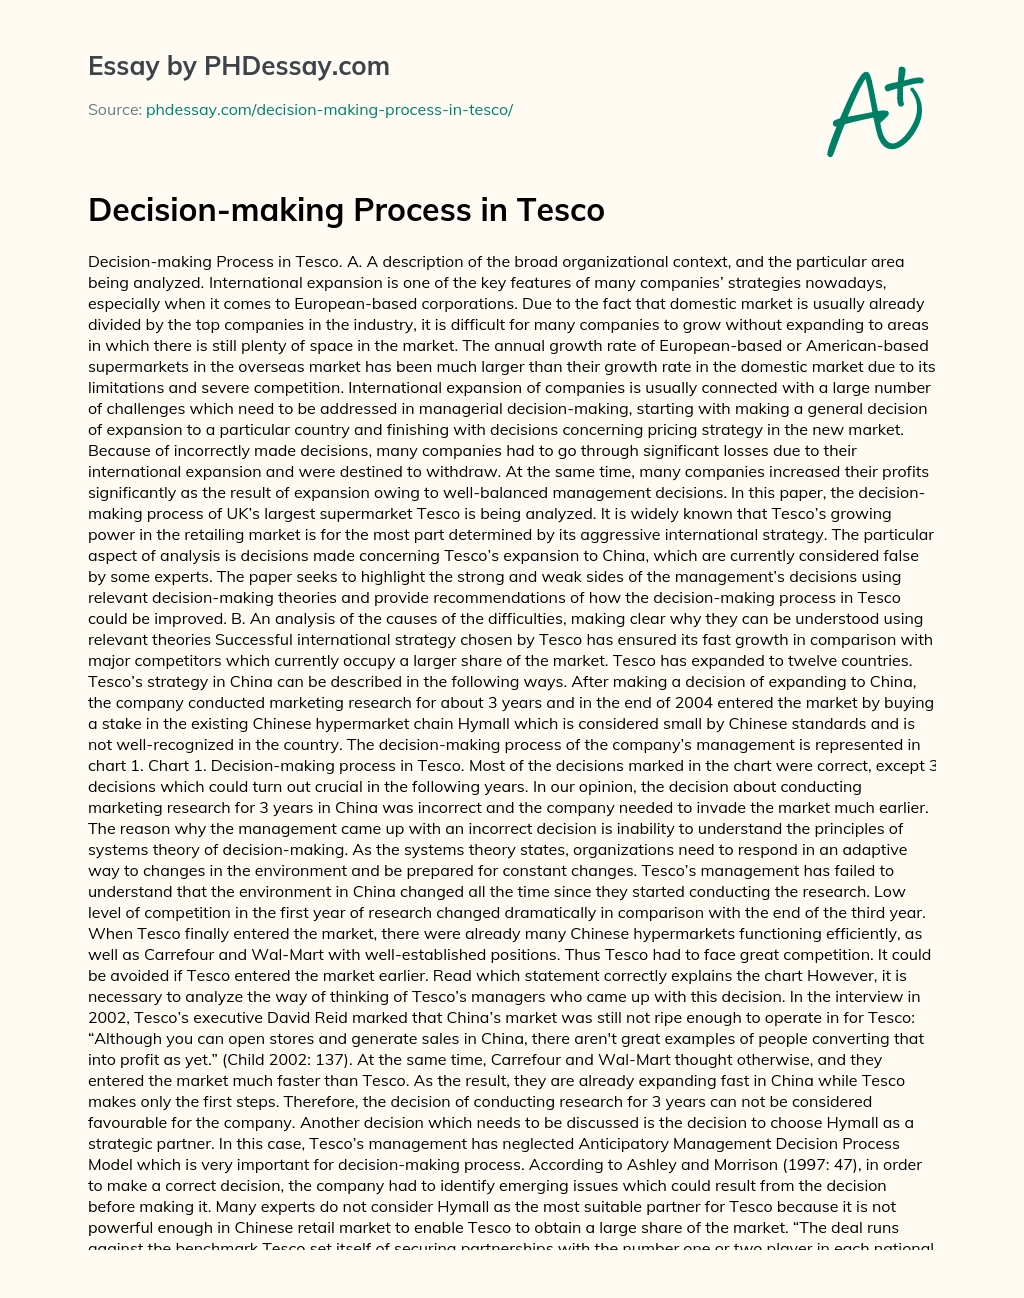 Decision-making Process in Tesco essay